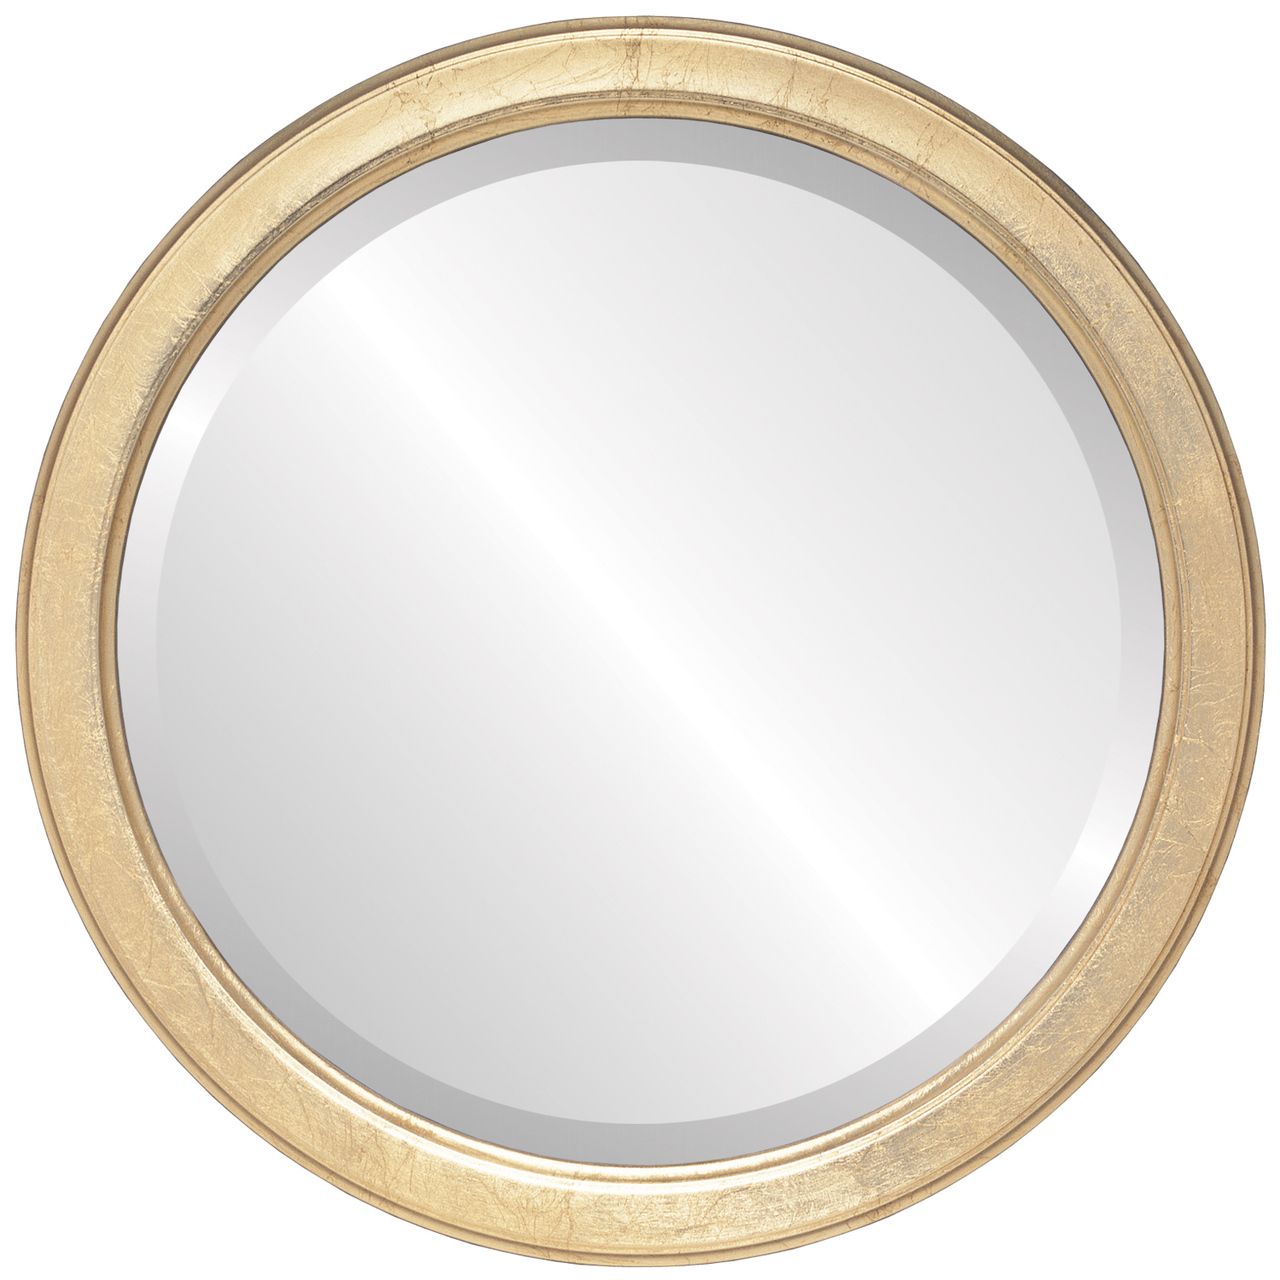 Contemporary Gold Round Mirrors From $114 | Free Shipping Within Gold Rounded Edge Mirrors (View 1 of 15)